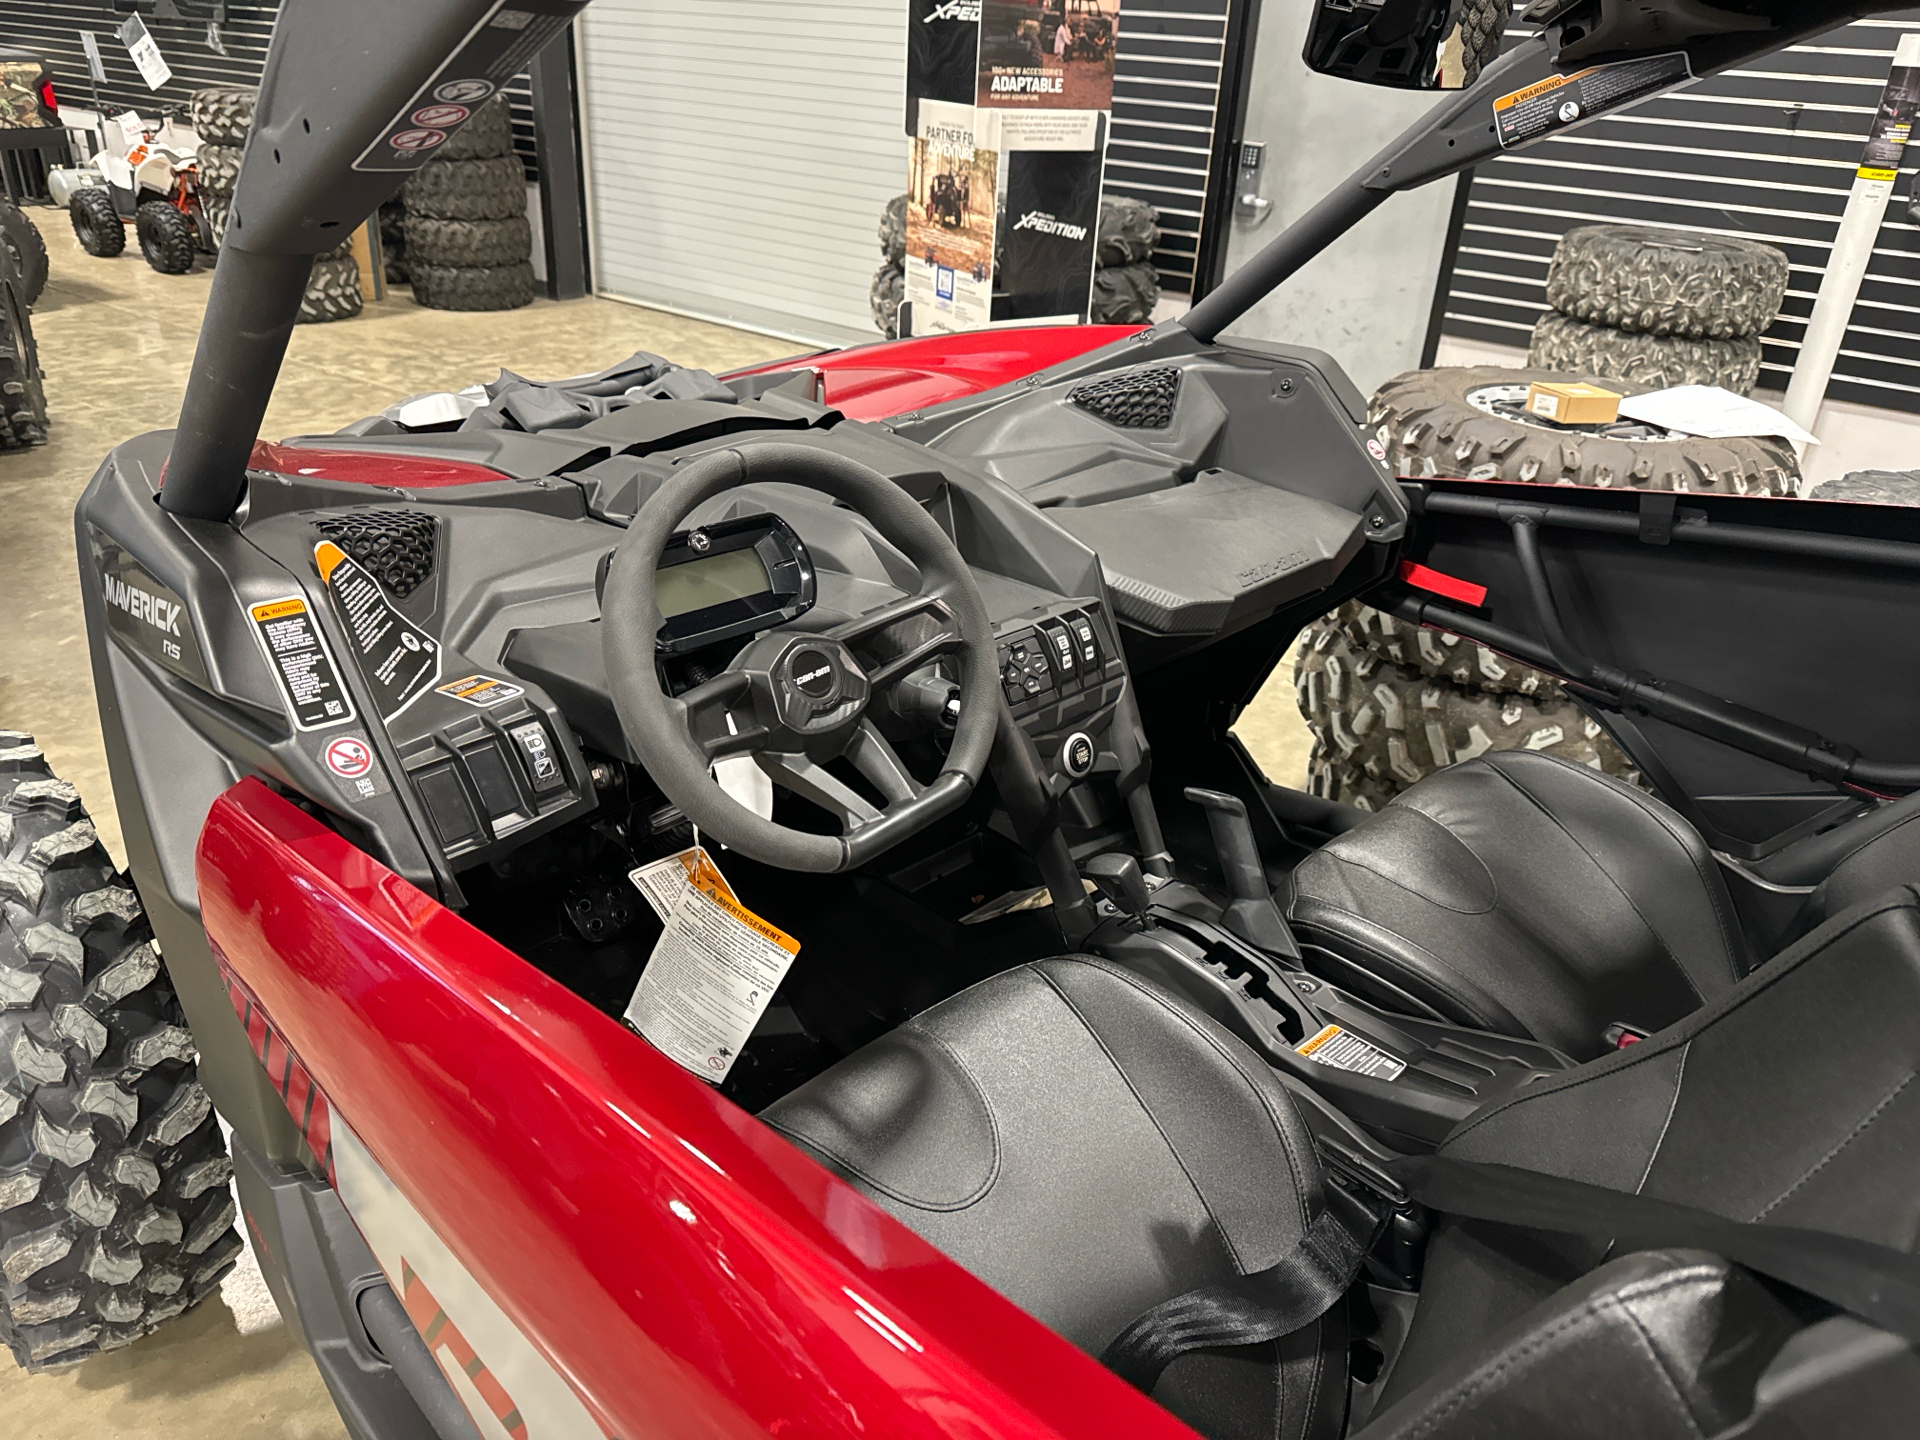 2024 Can-Am Maverick X3 RS Turbo in Leland, Mississippi - Photo 4